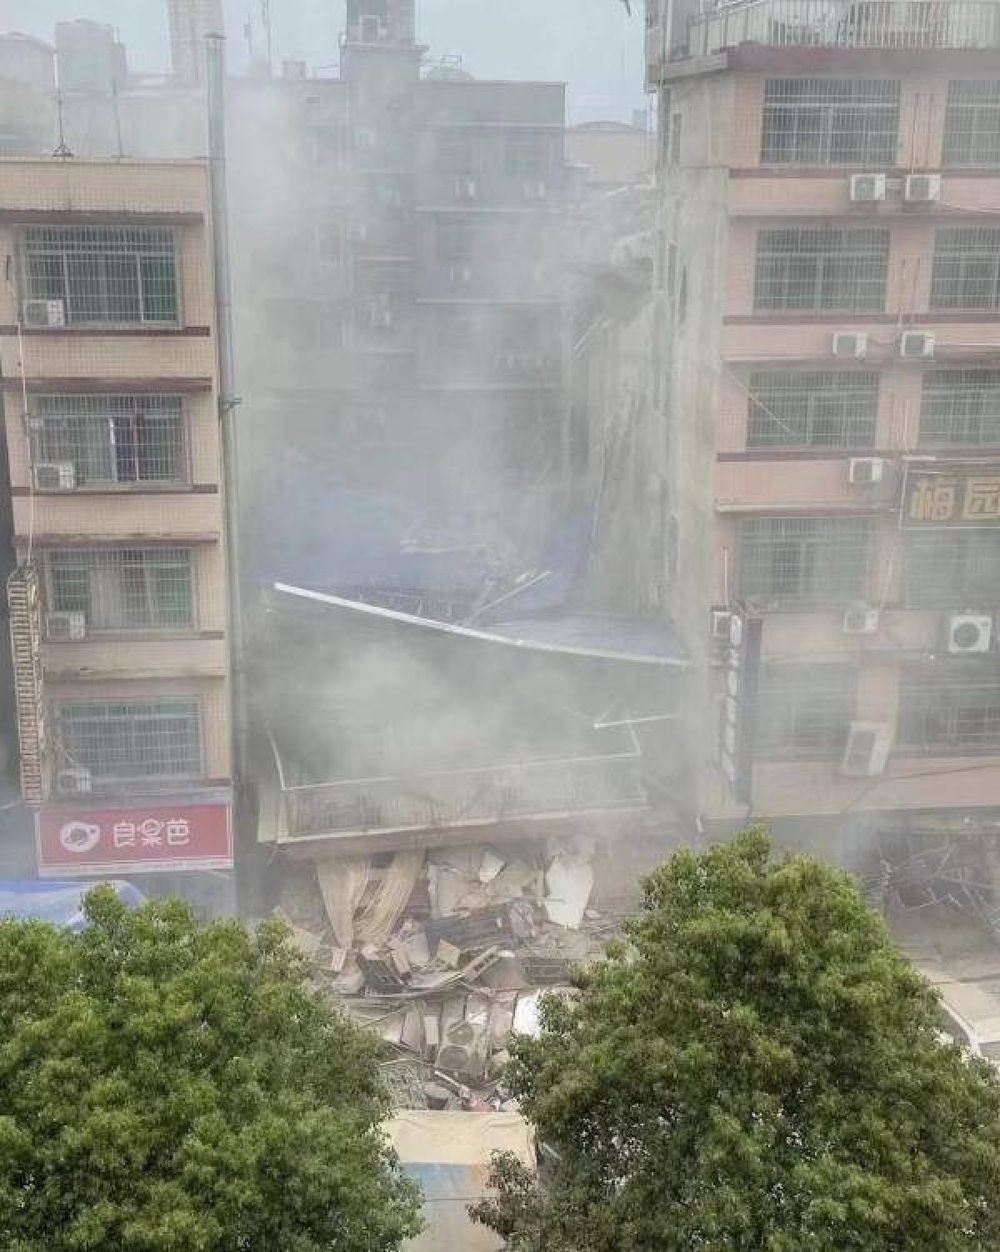 Nearly 60 people were trapped and missing in a house collapse in China - Photo 1.